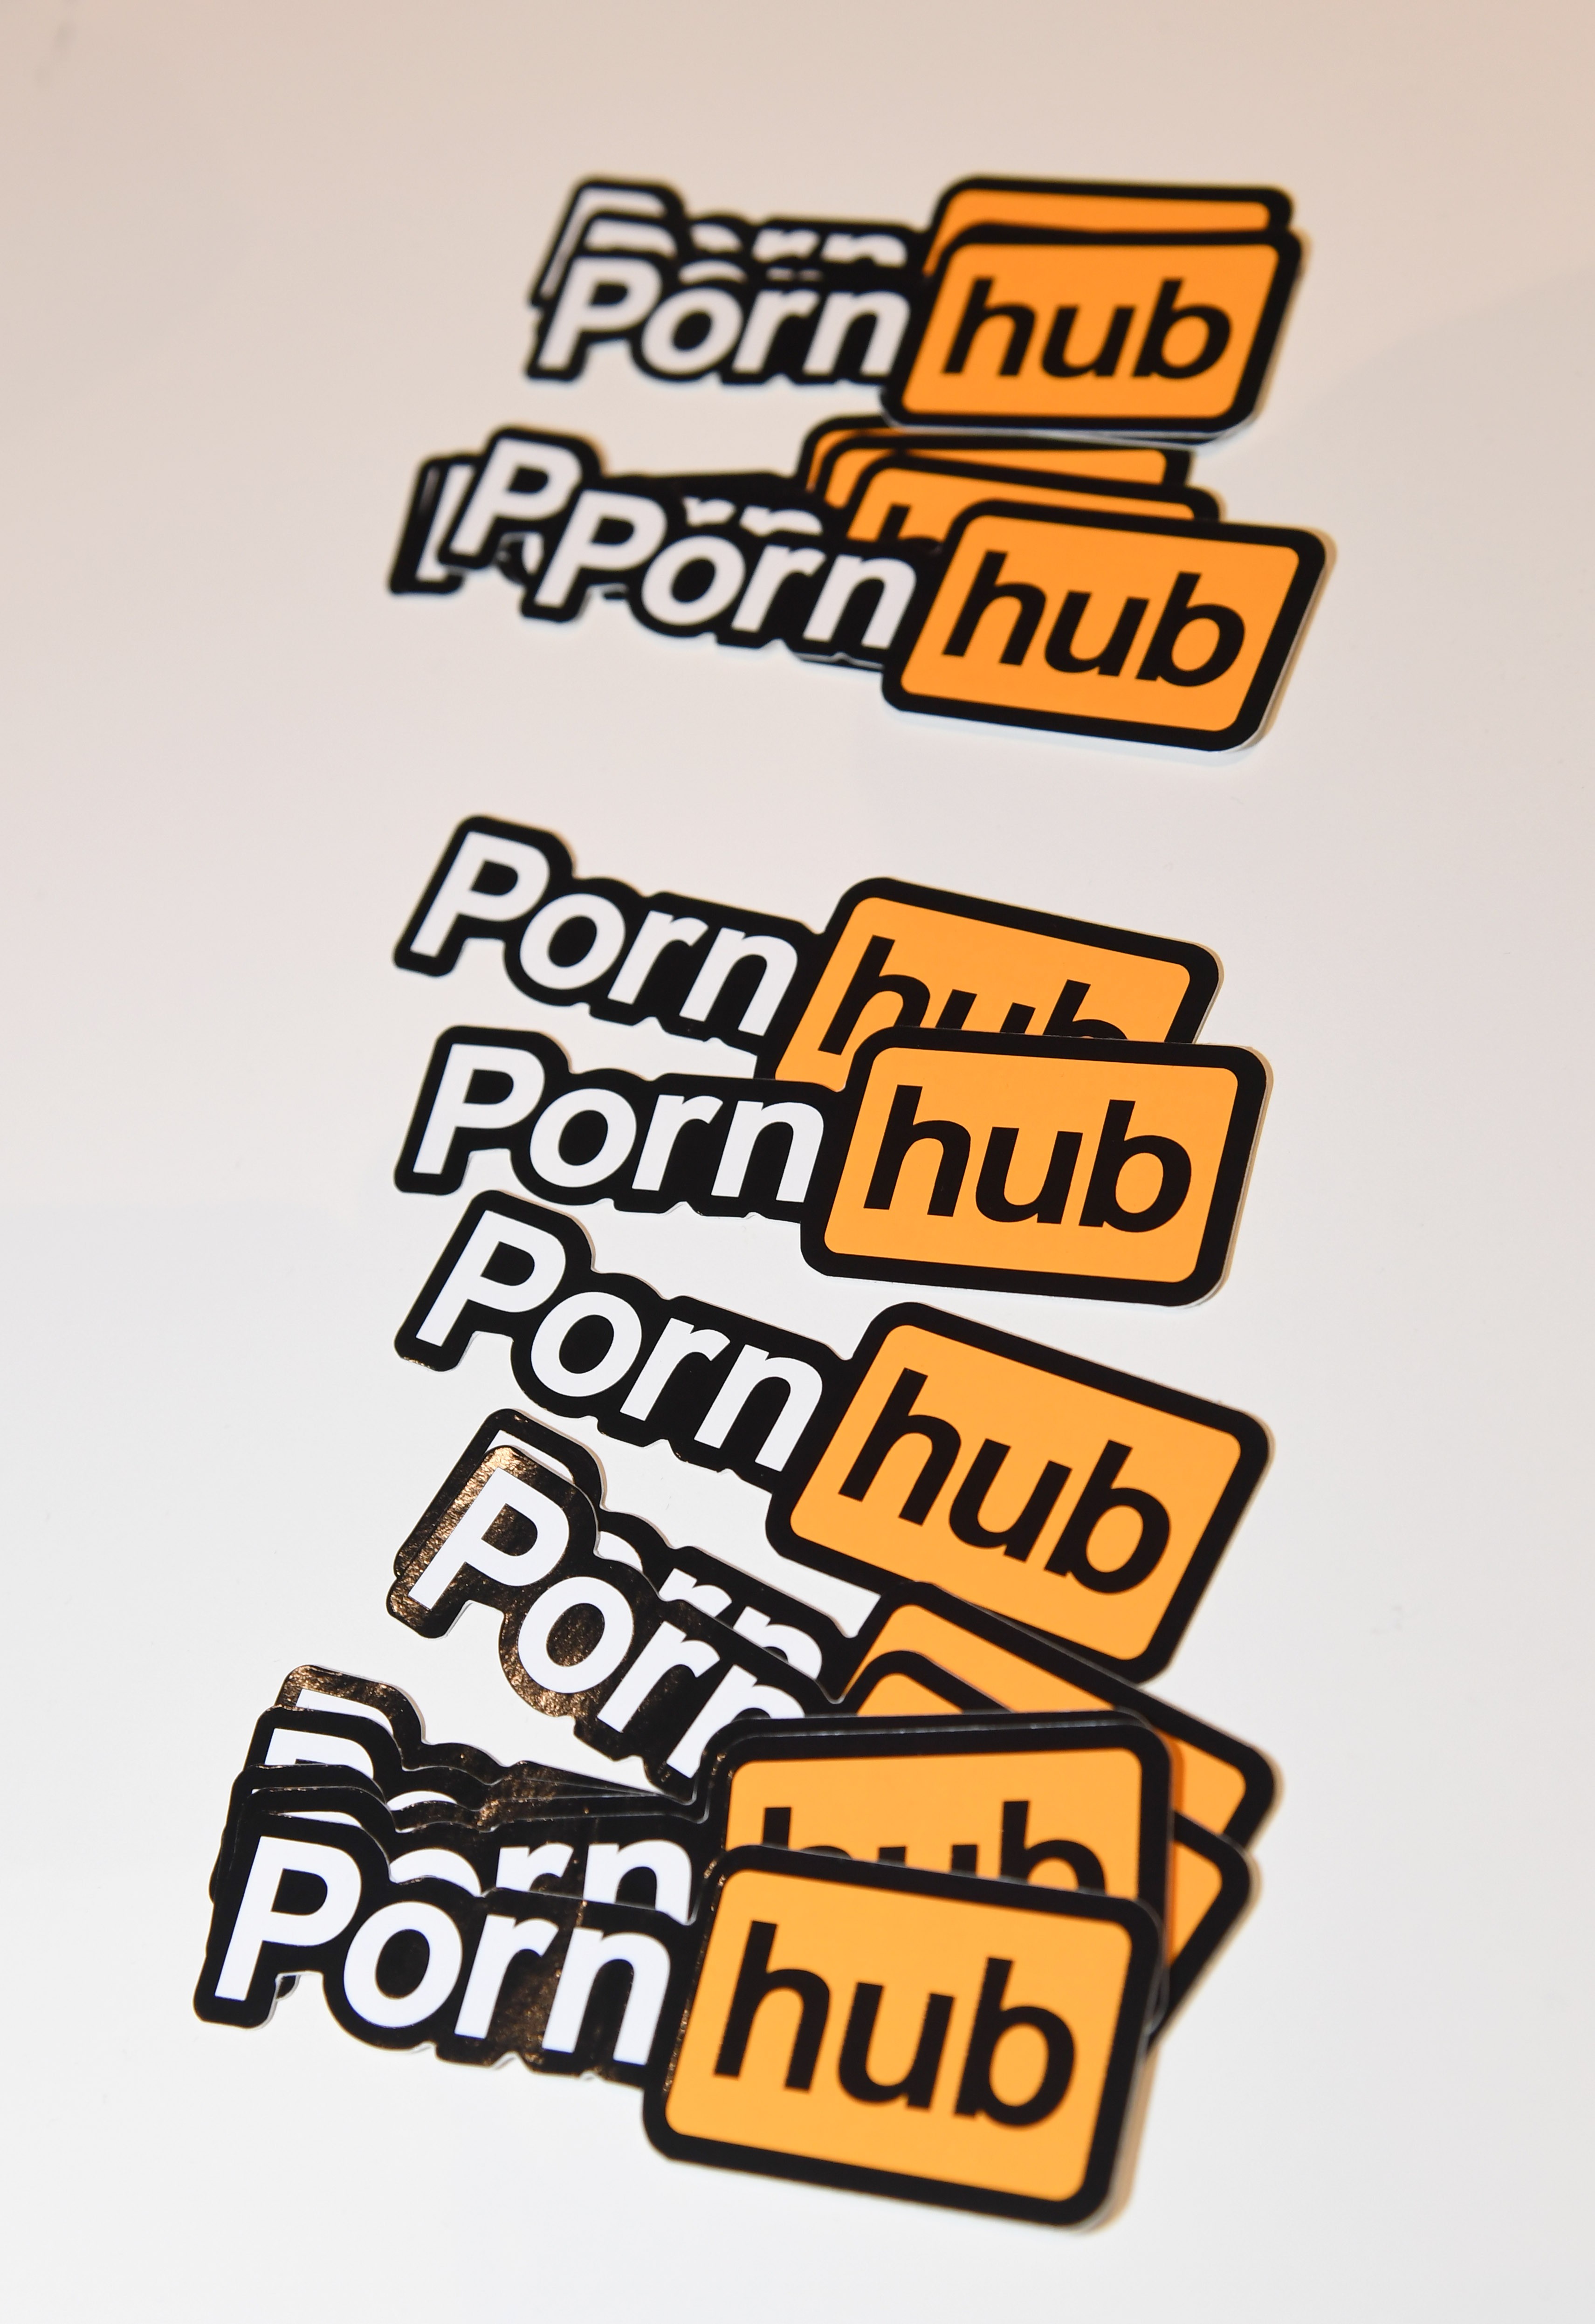 Independent creators say they stand to lose the most from credit card  crackdown on Pornhub